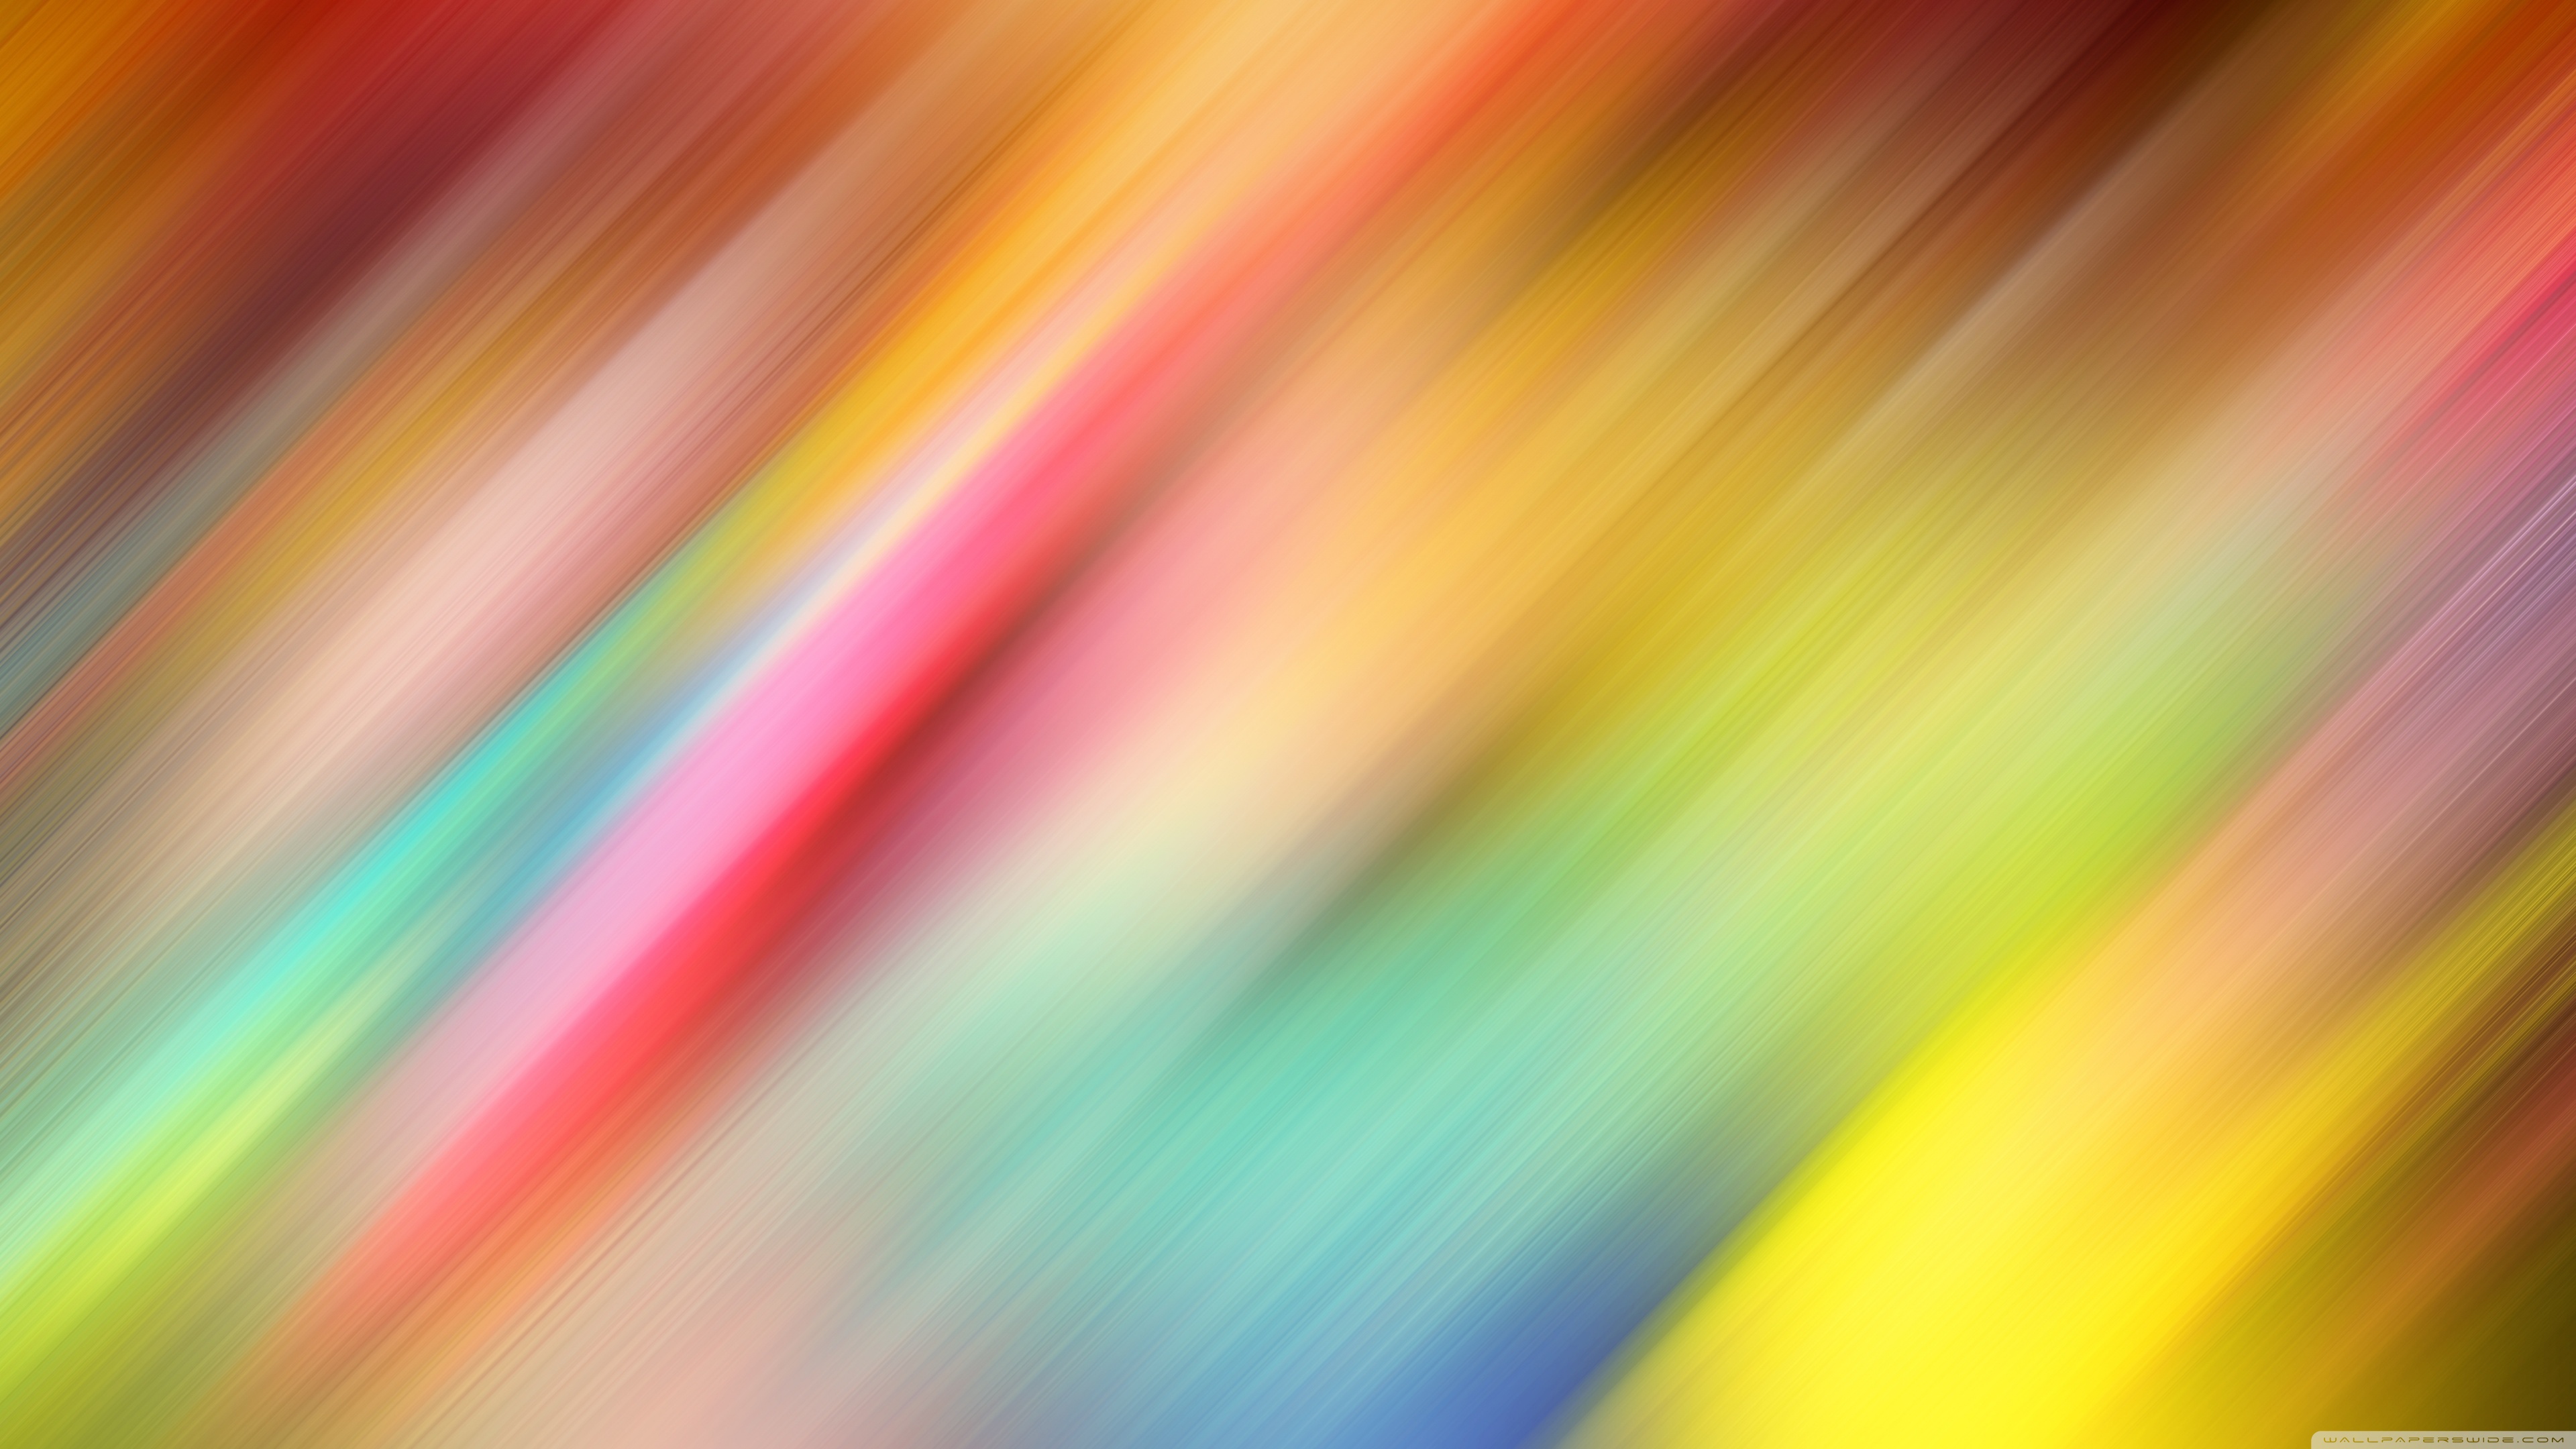 Full Hd Colorful Background - 3840x2160 Wallpaper 